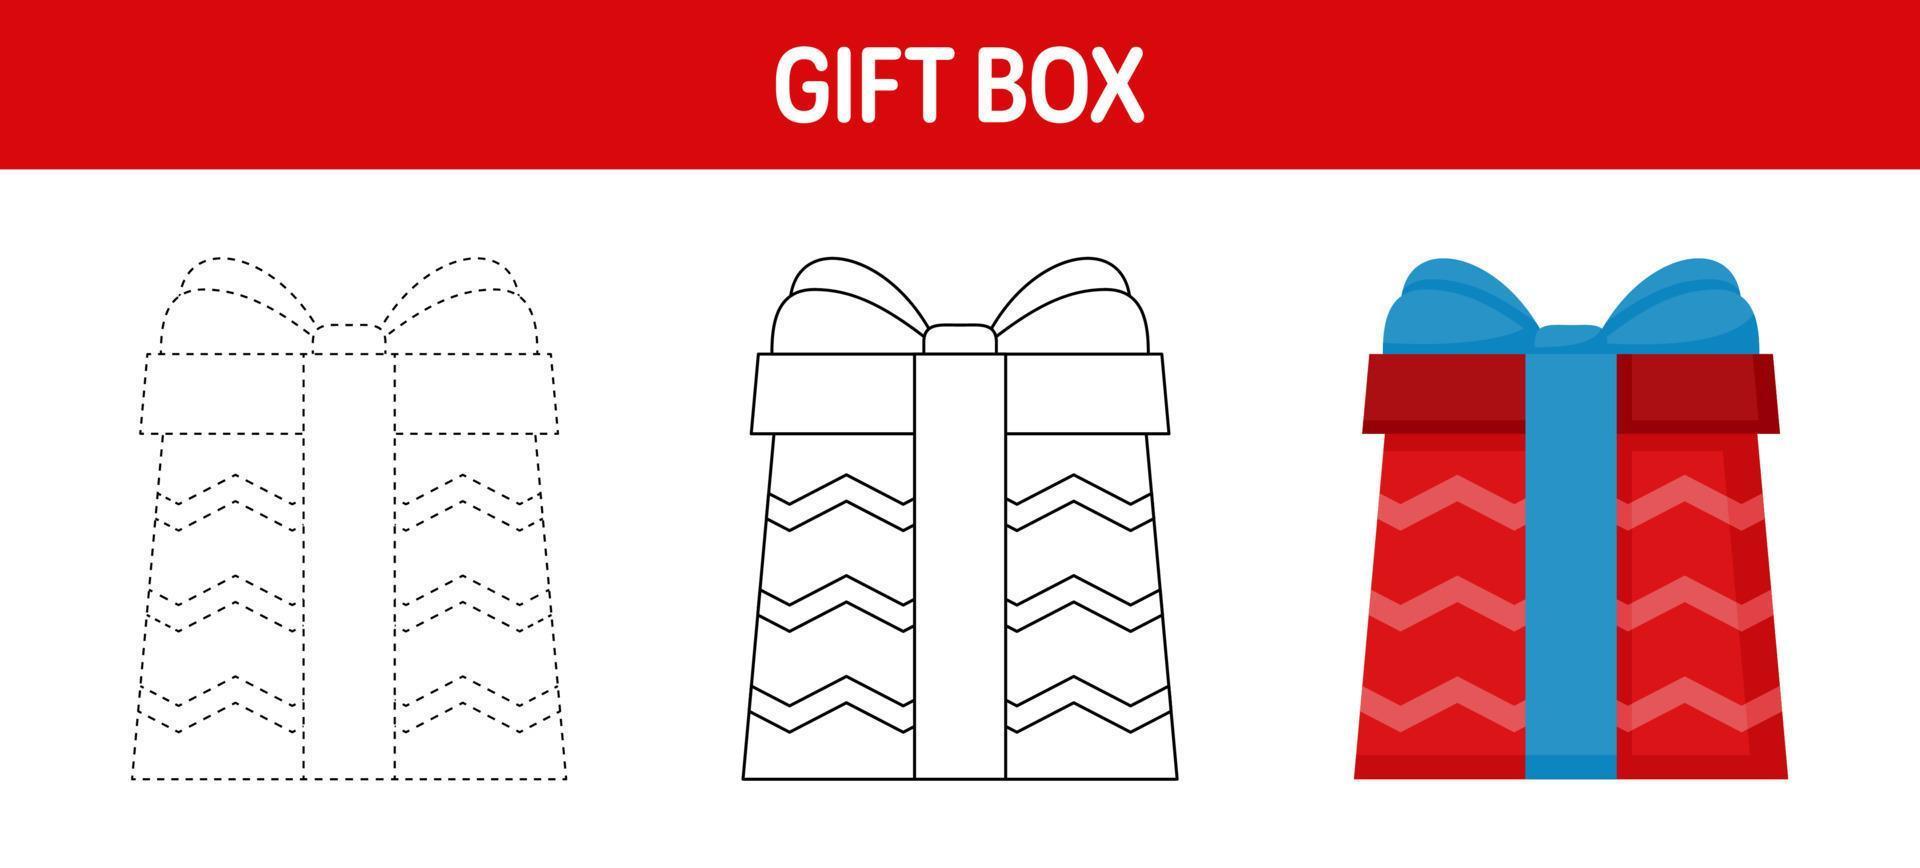 Giftbox tracing and coloring worksheet for kids vector